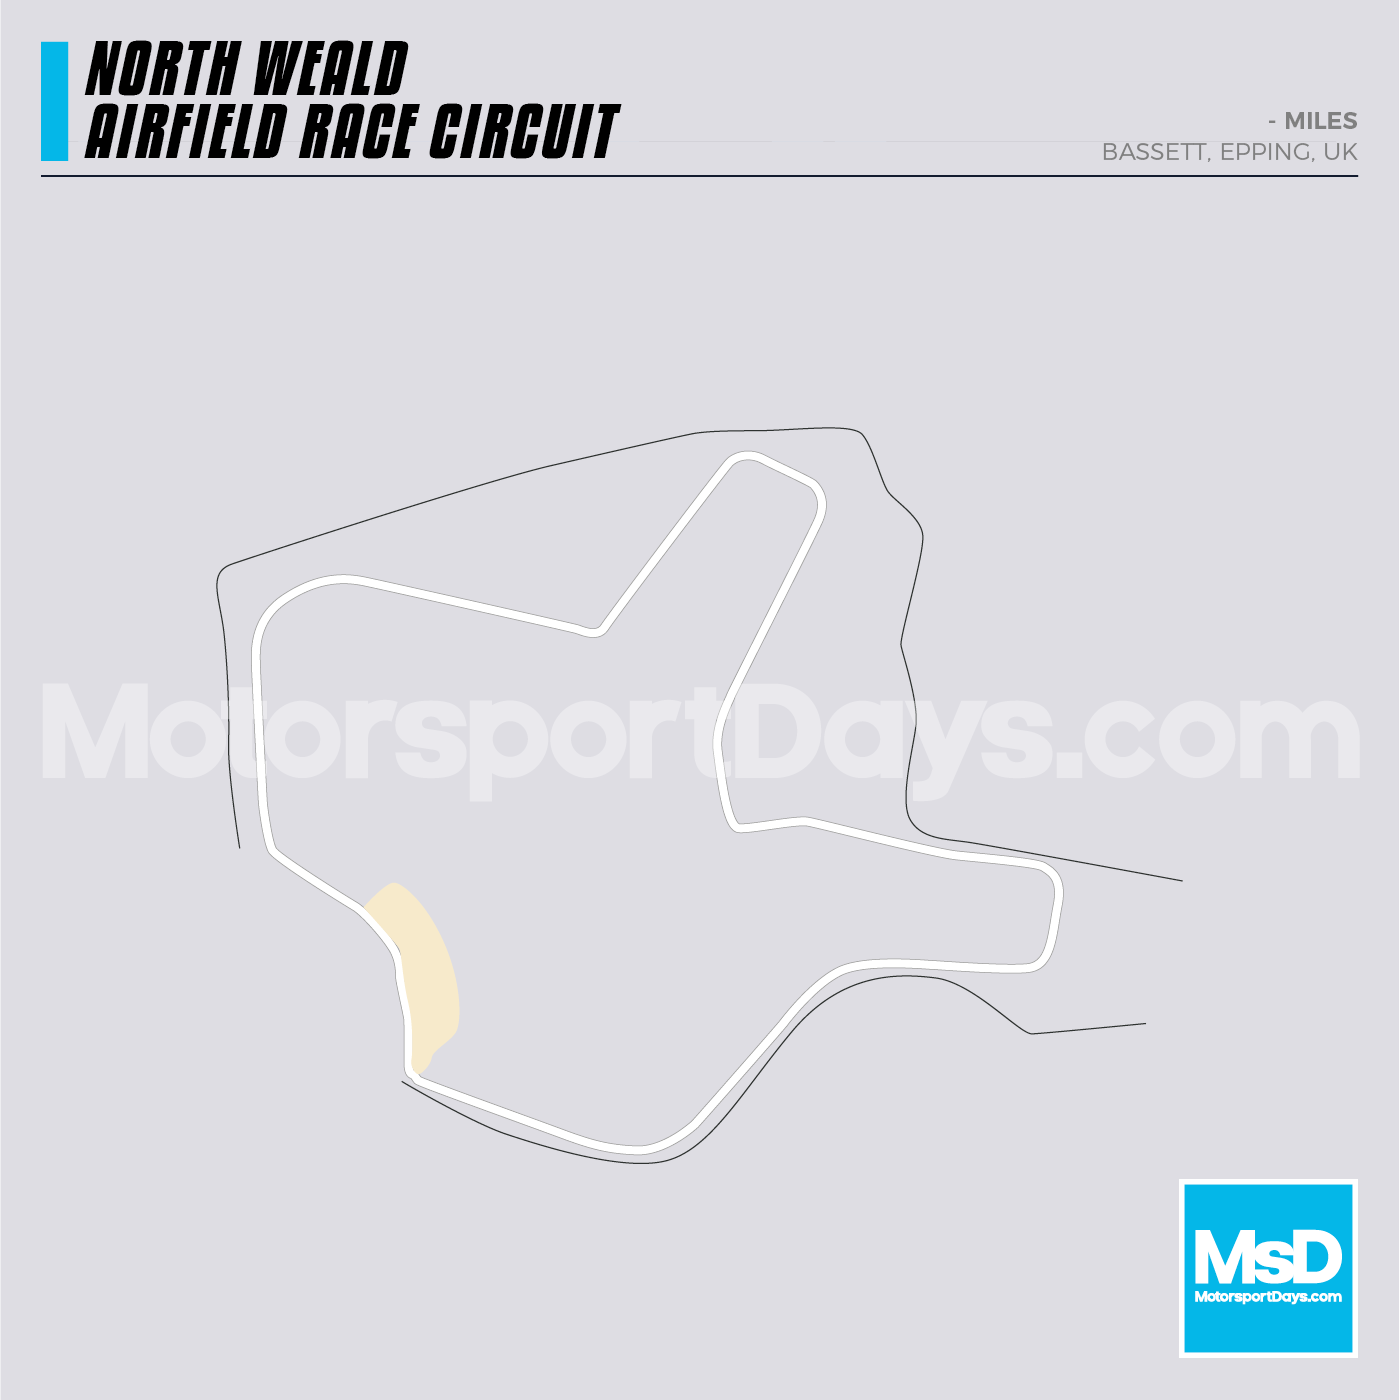 North Weald Airfield-Circuit-track-map